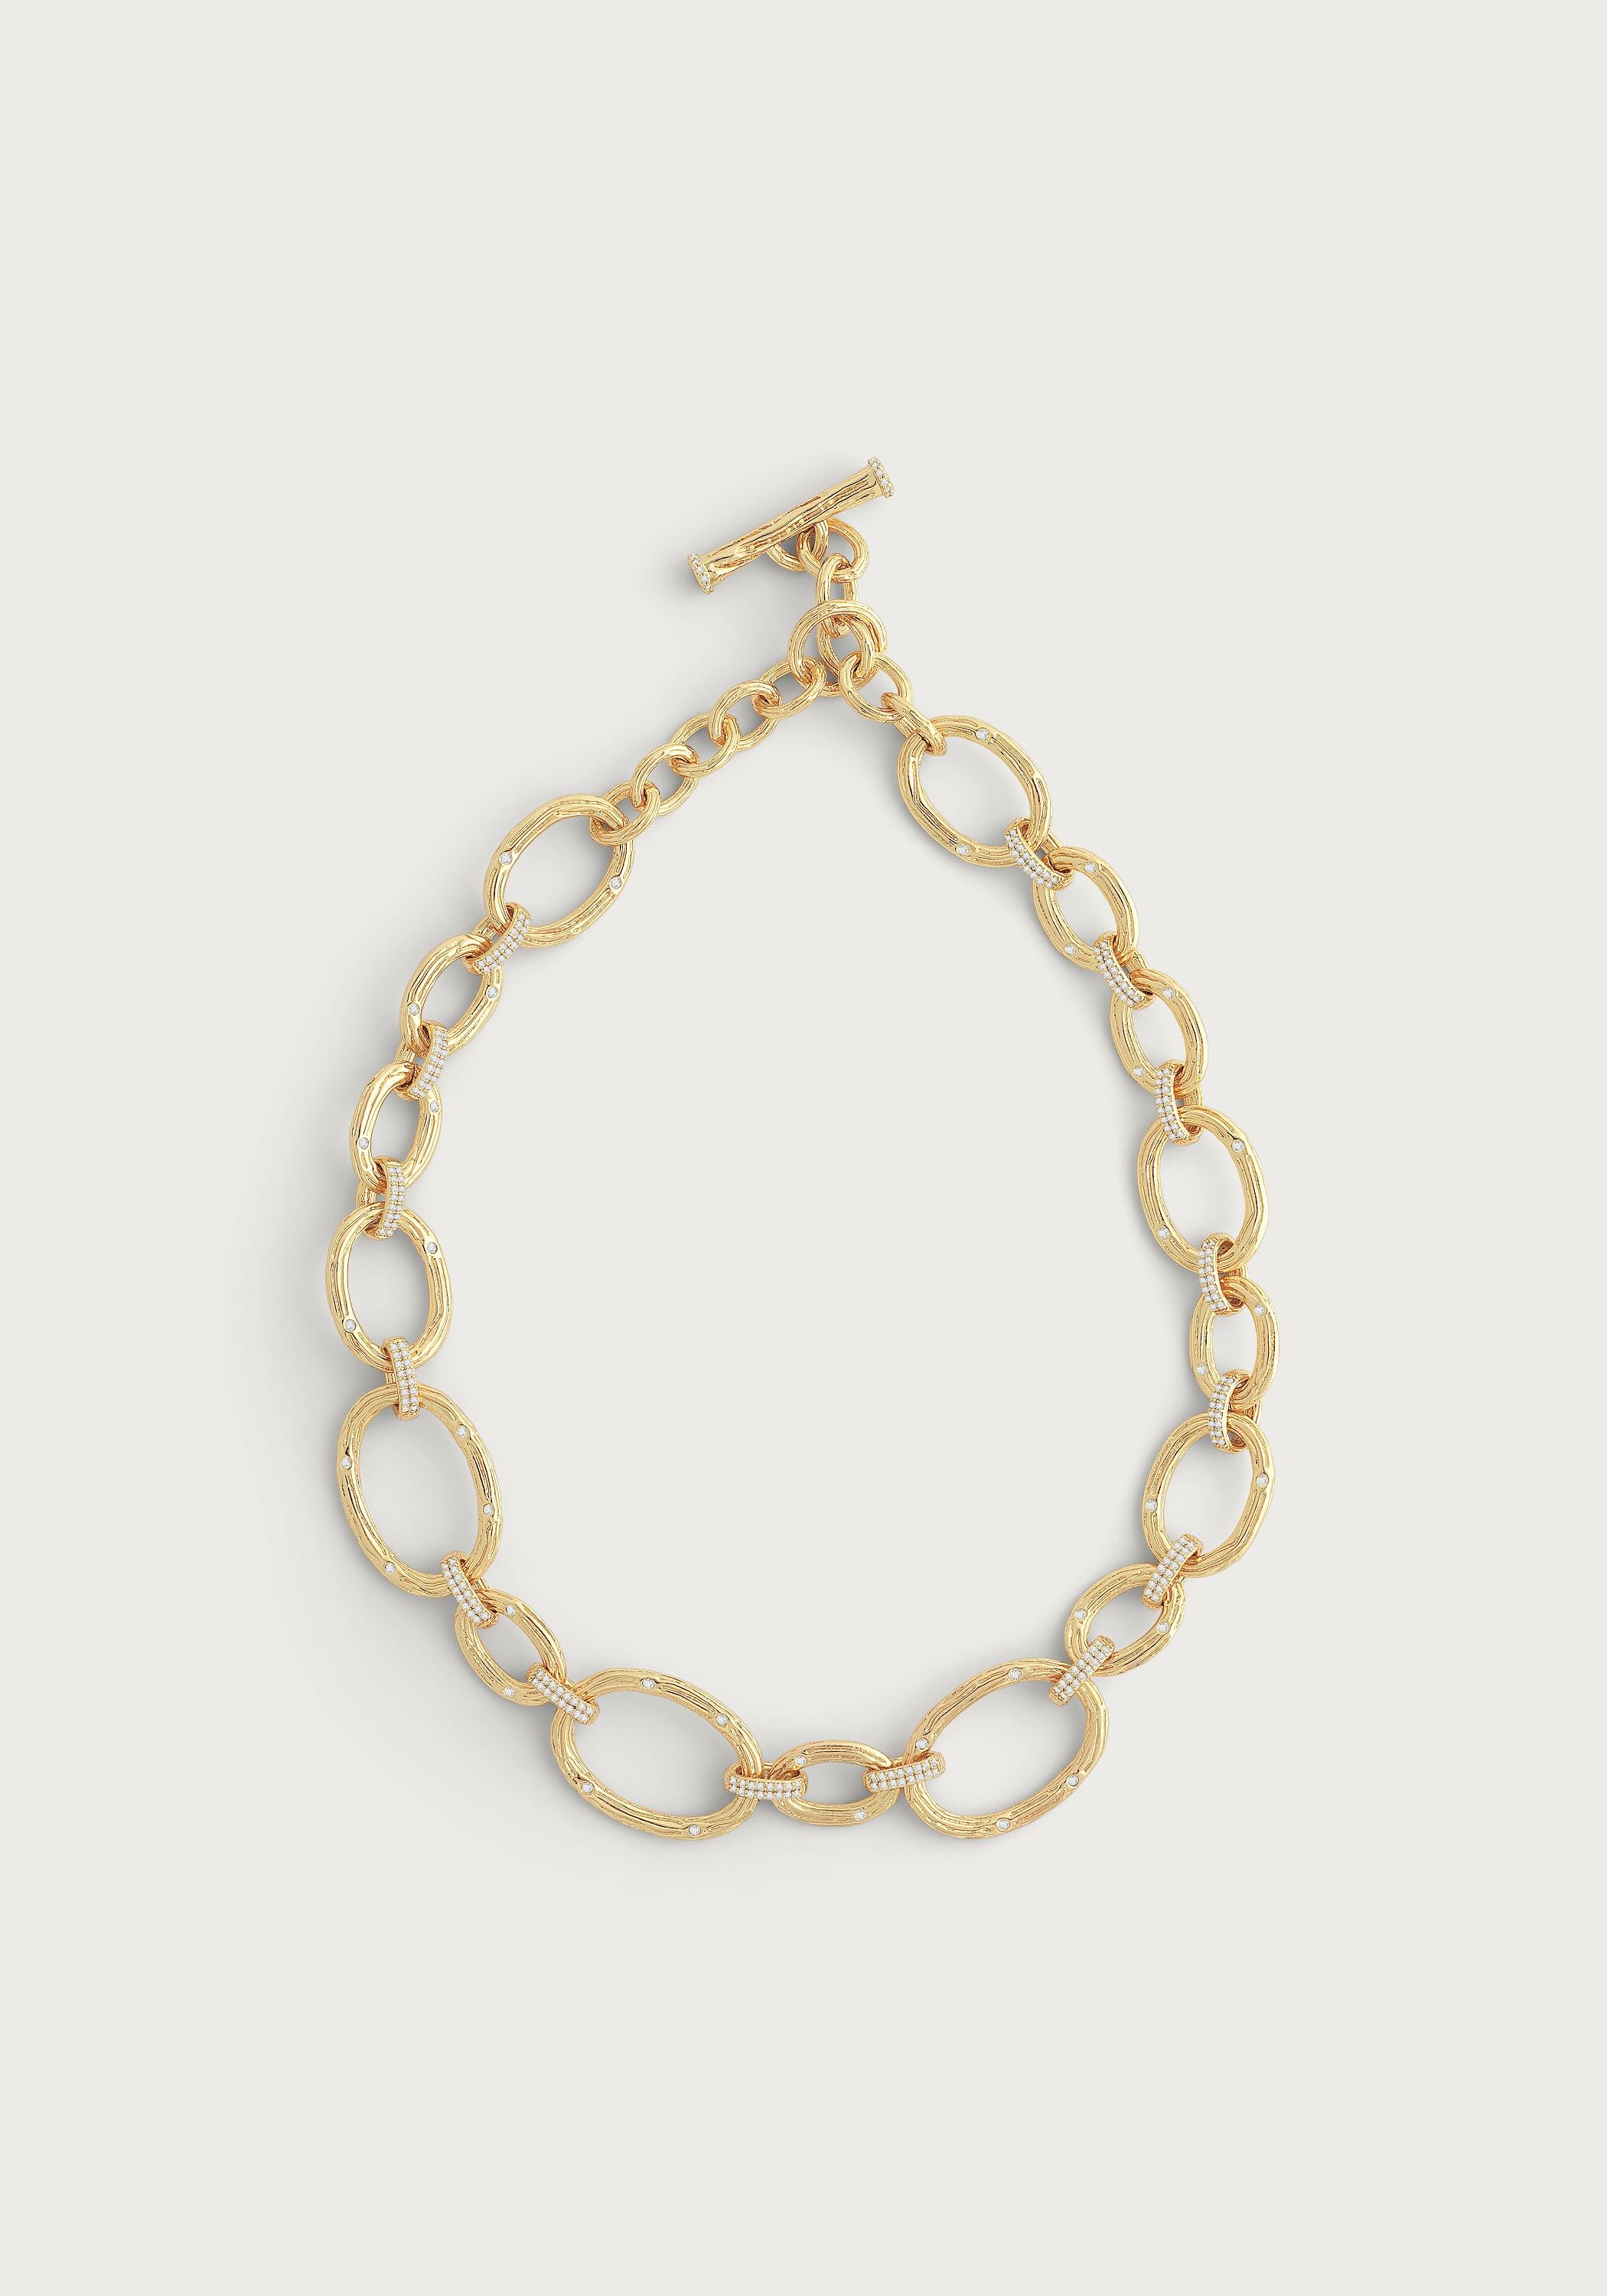 Enchanted Forest Chain Necklace - Anabel Aram